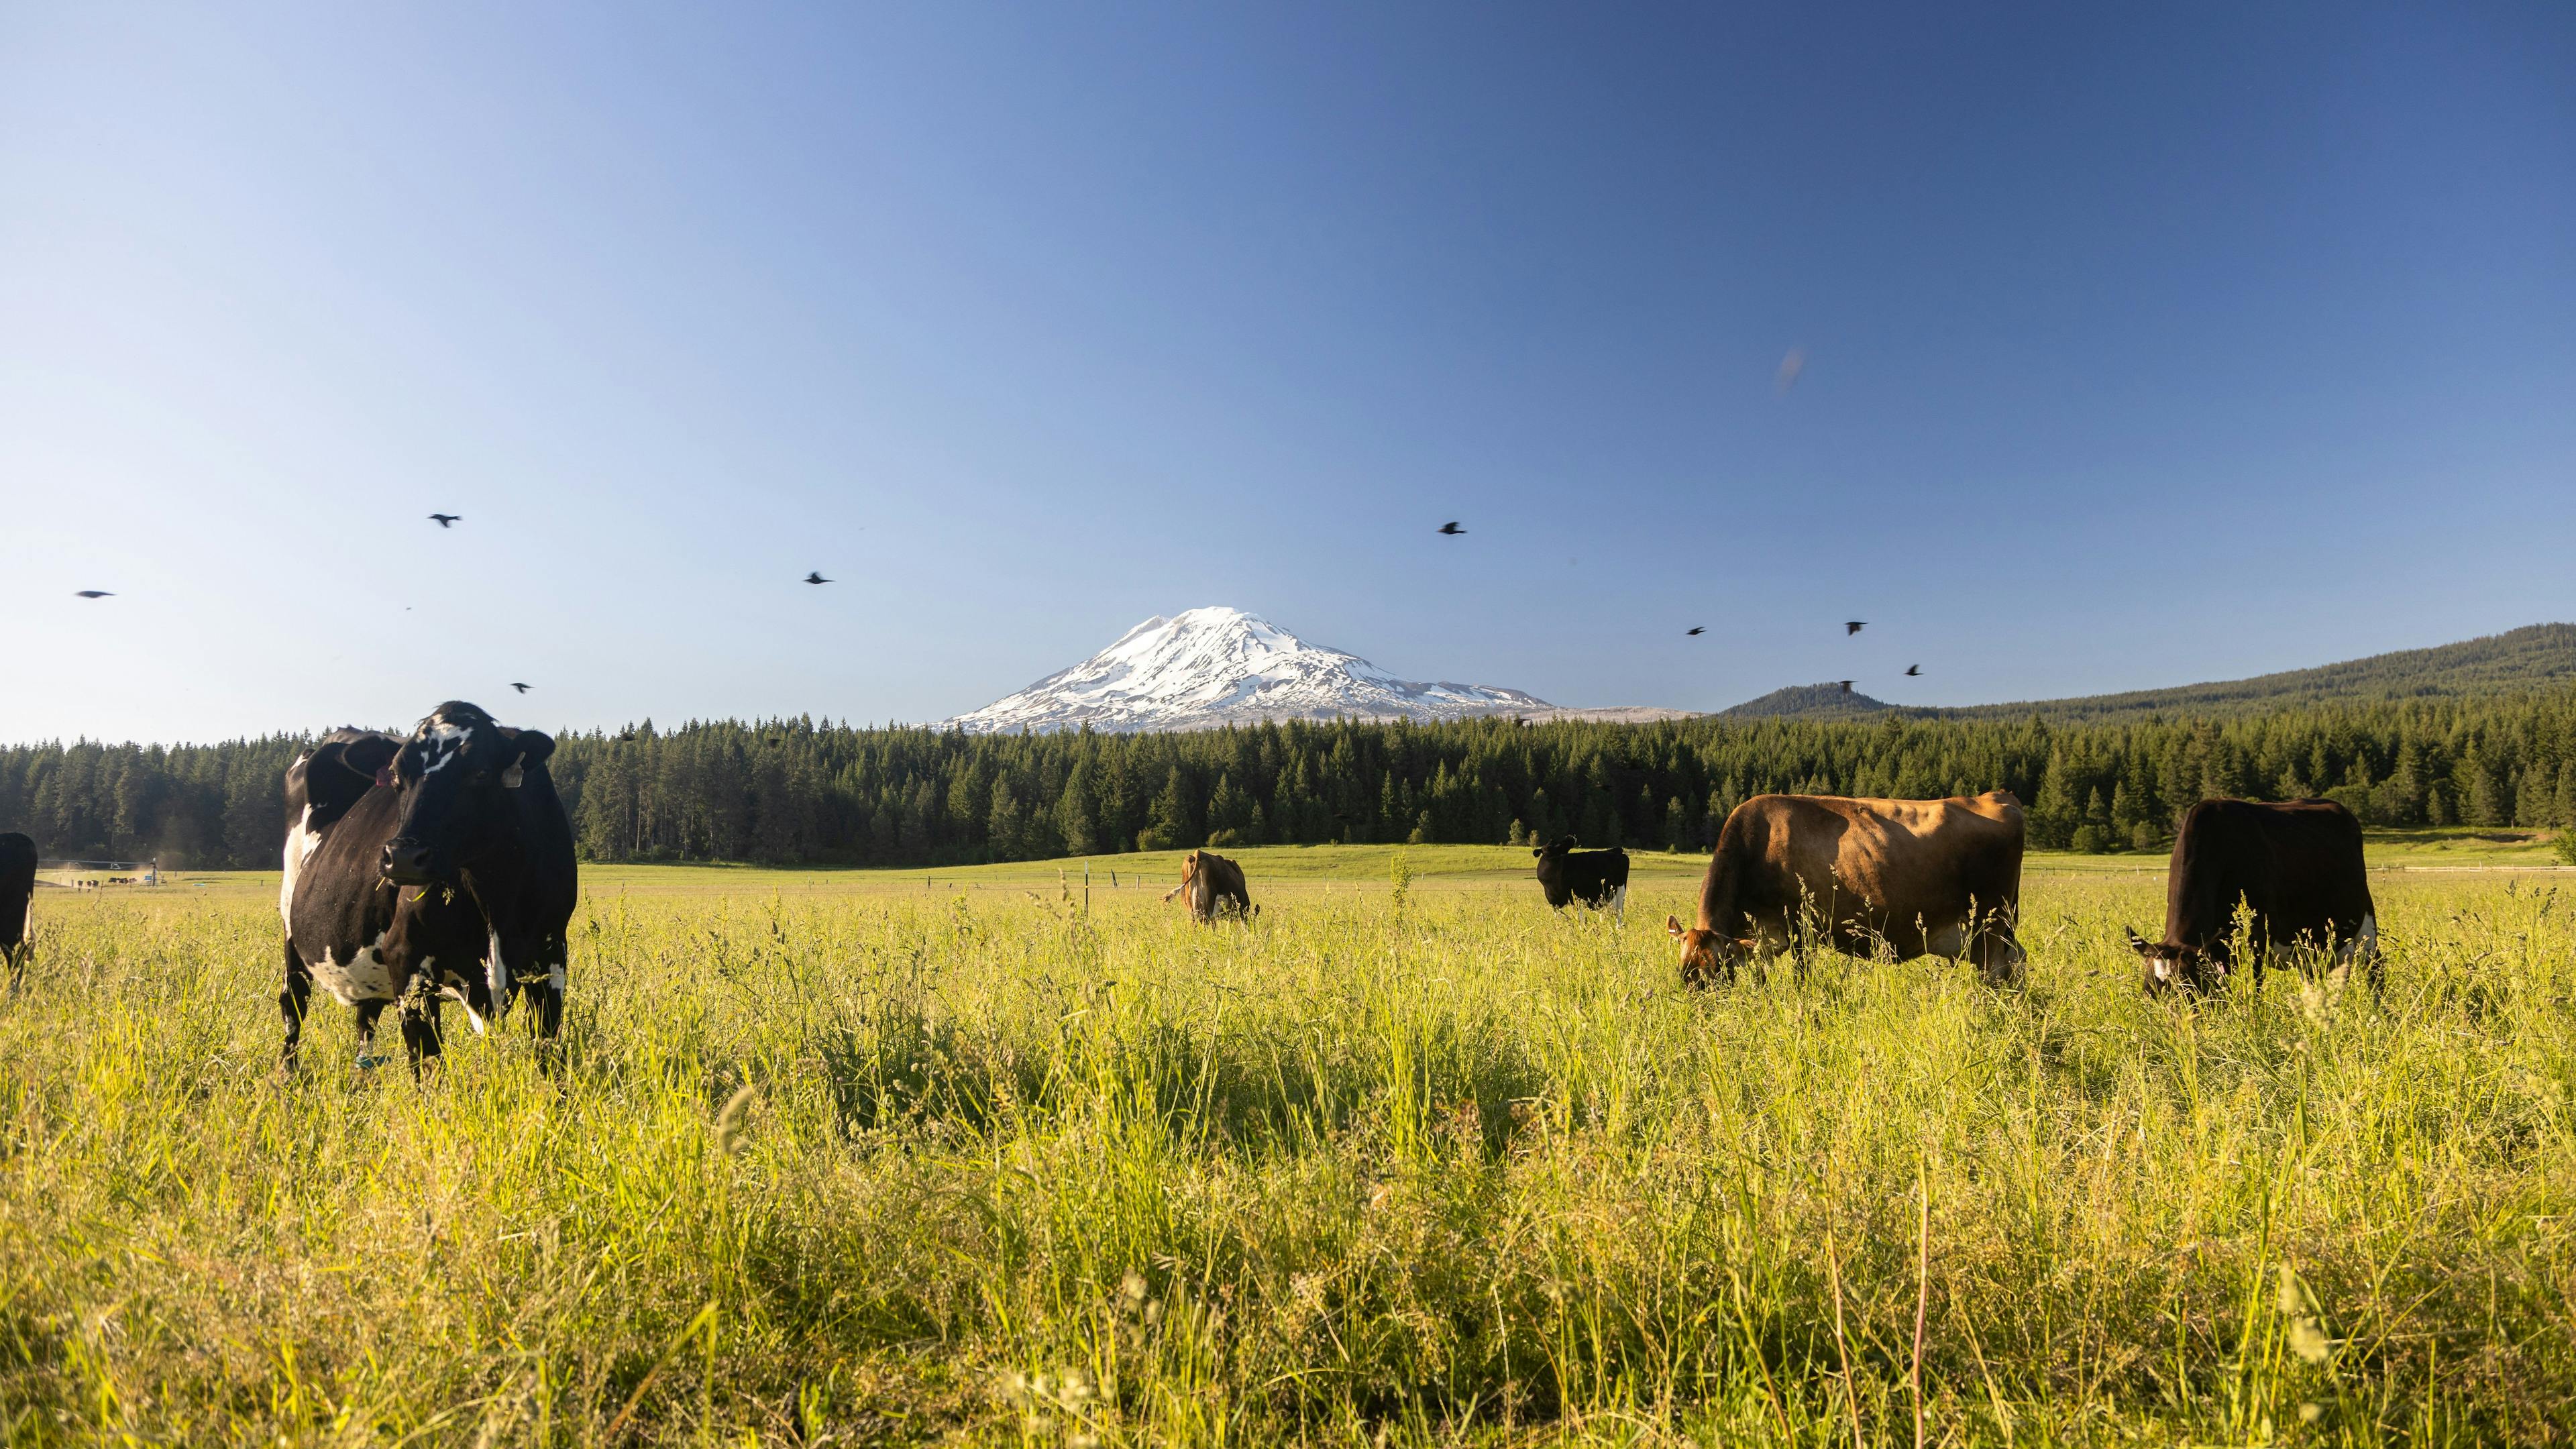 Birds fly above cows on pasture with Mount Adams in the background at an organic farm in Washington.